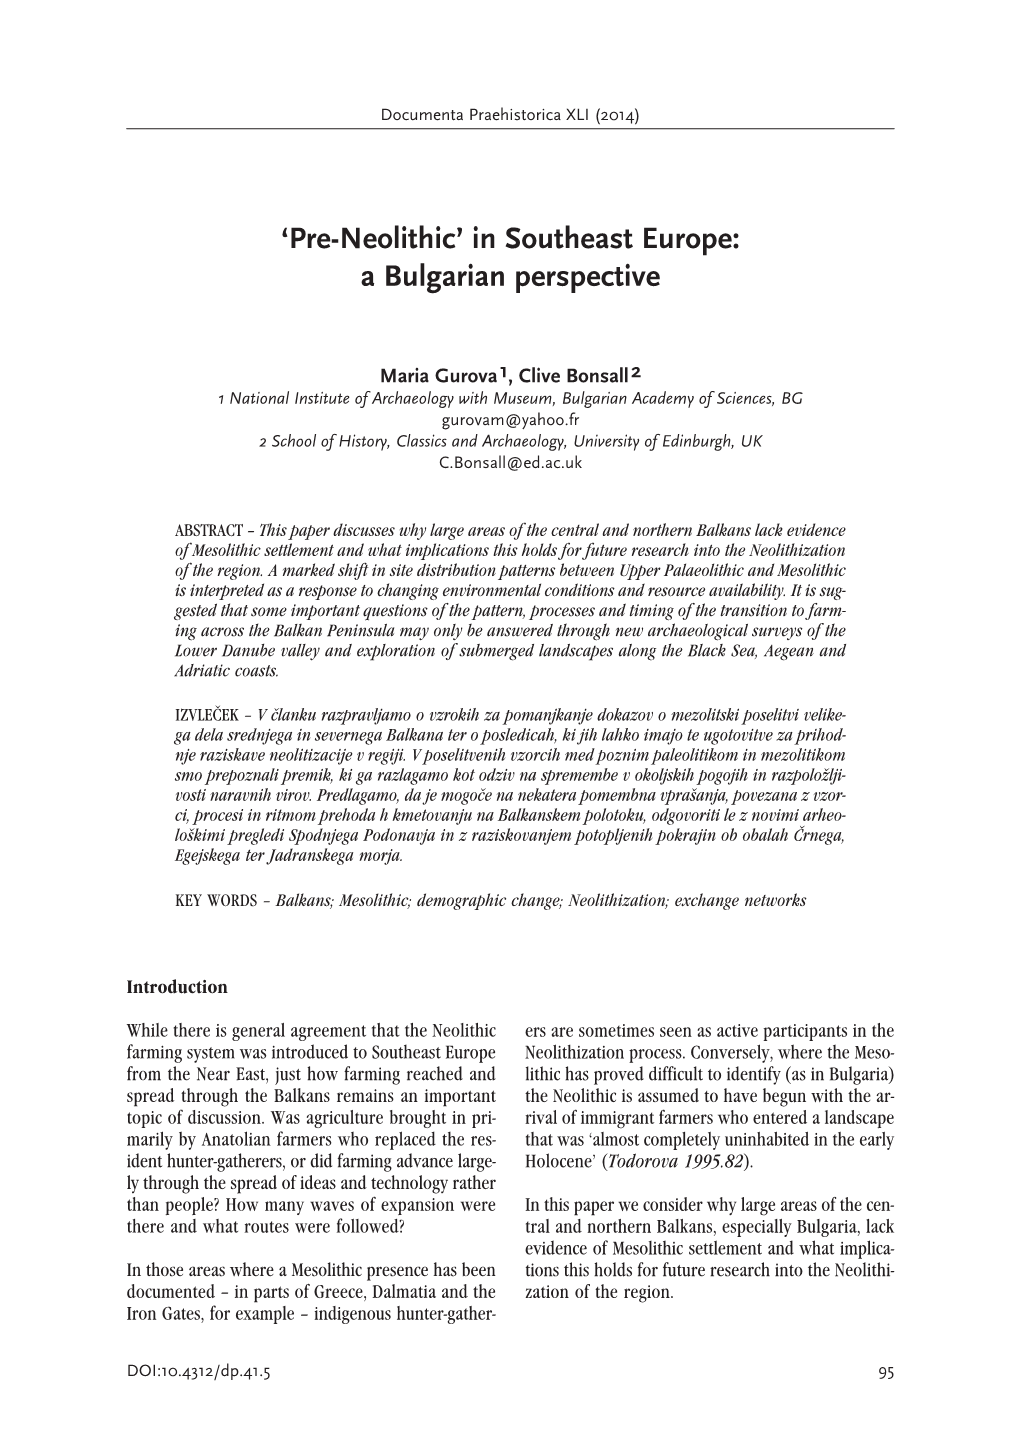 Pre-Neolithic’ in Southeast Europe> a Bulgarian Perspective